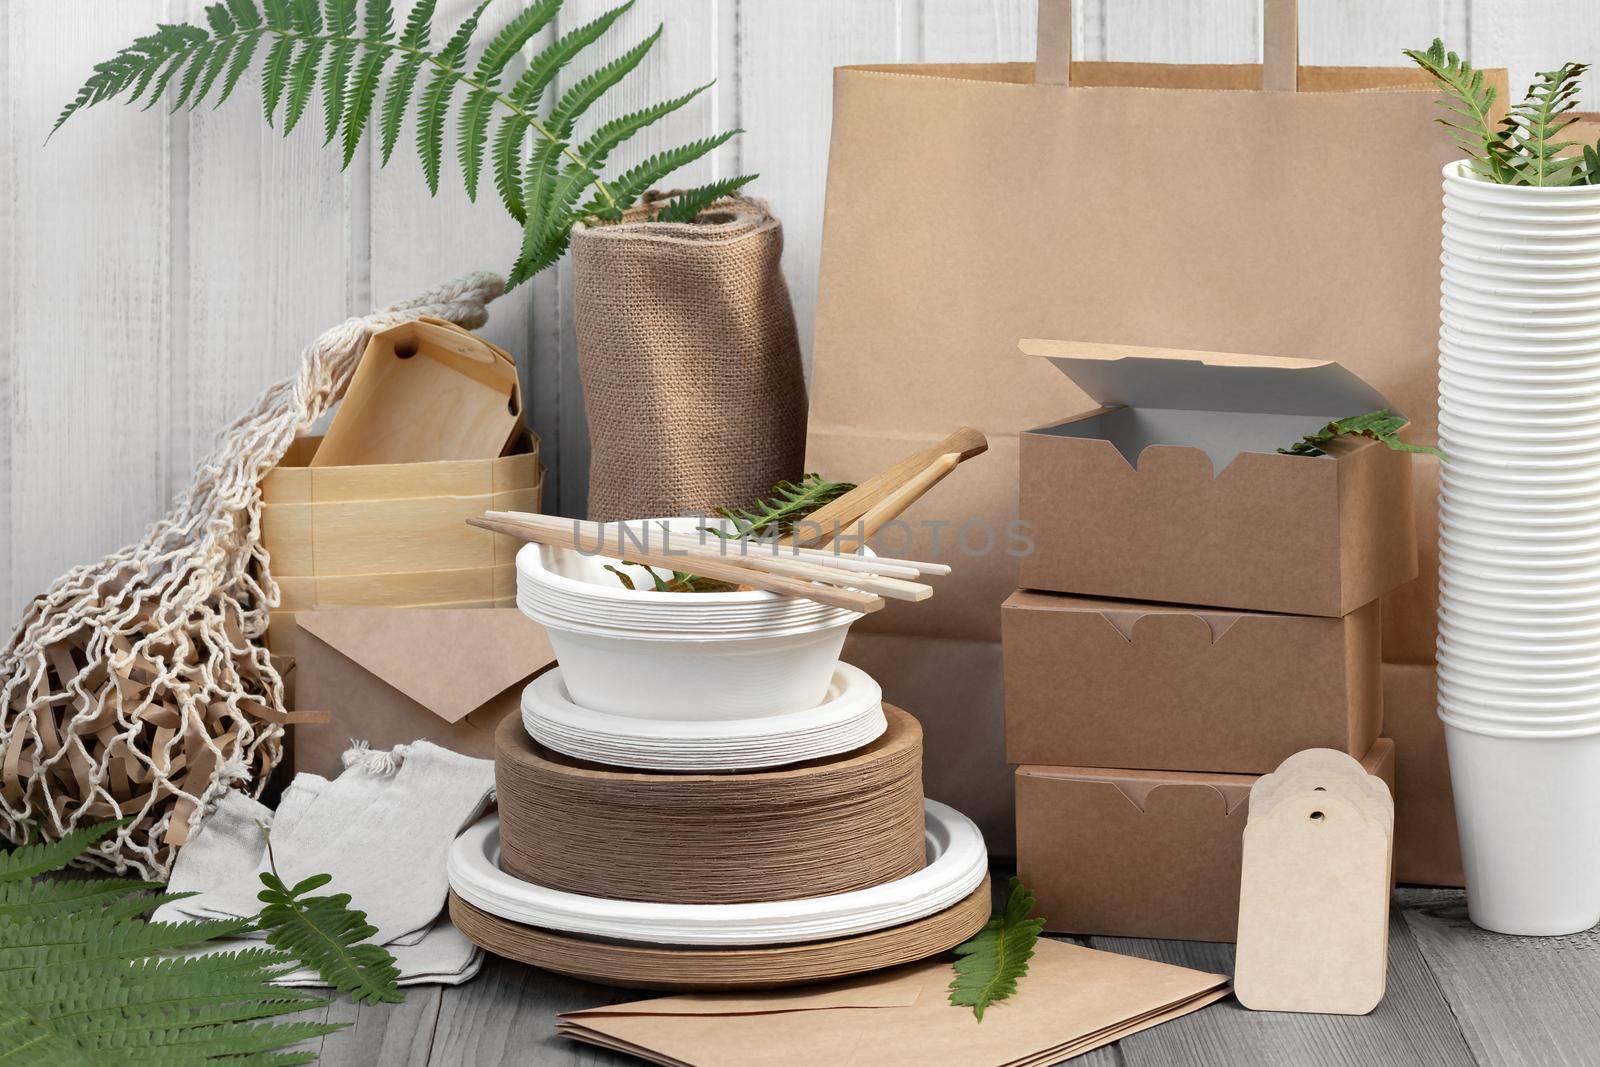 Eco friendly packaging and dishes made from natural recyclable materials. Environmental protection and waste reduction concept.